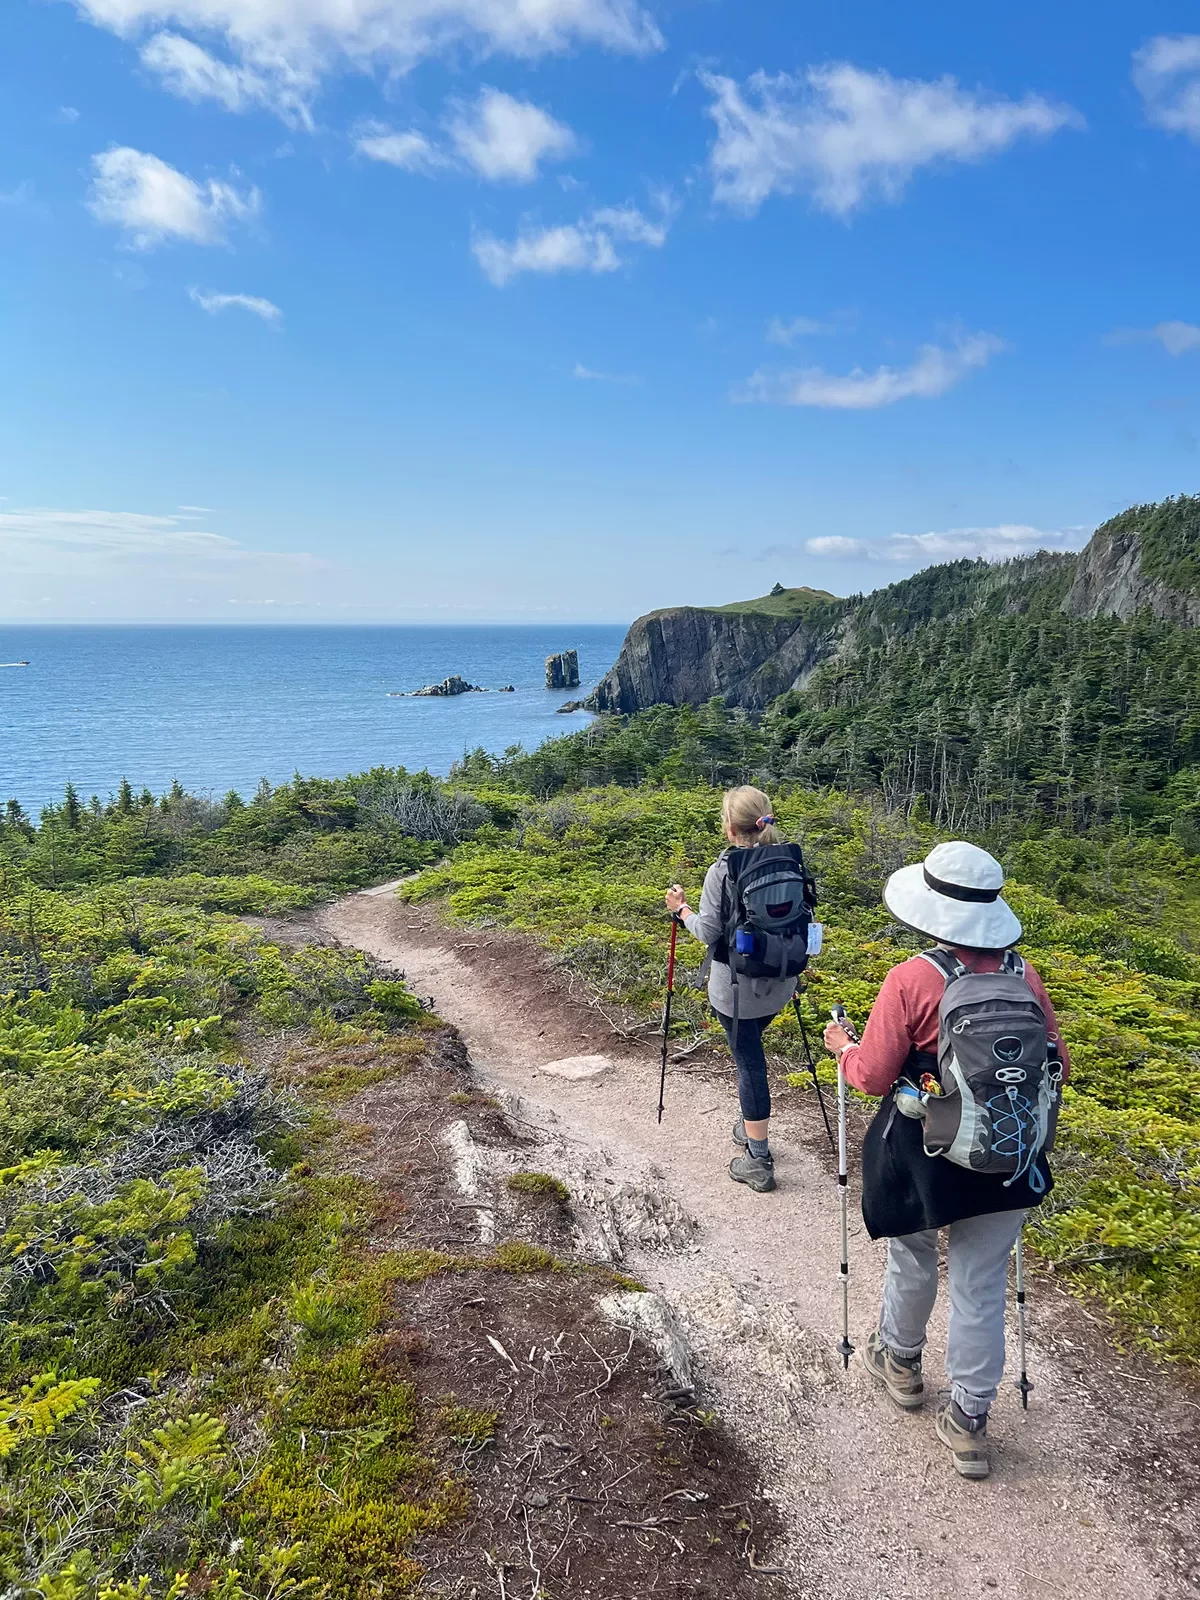 Two guests hiking towards ocean, rocky cliff to their right.